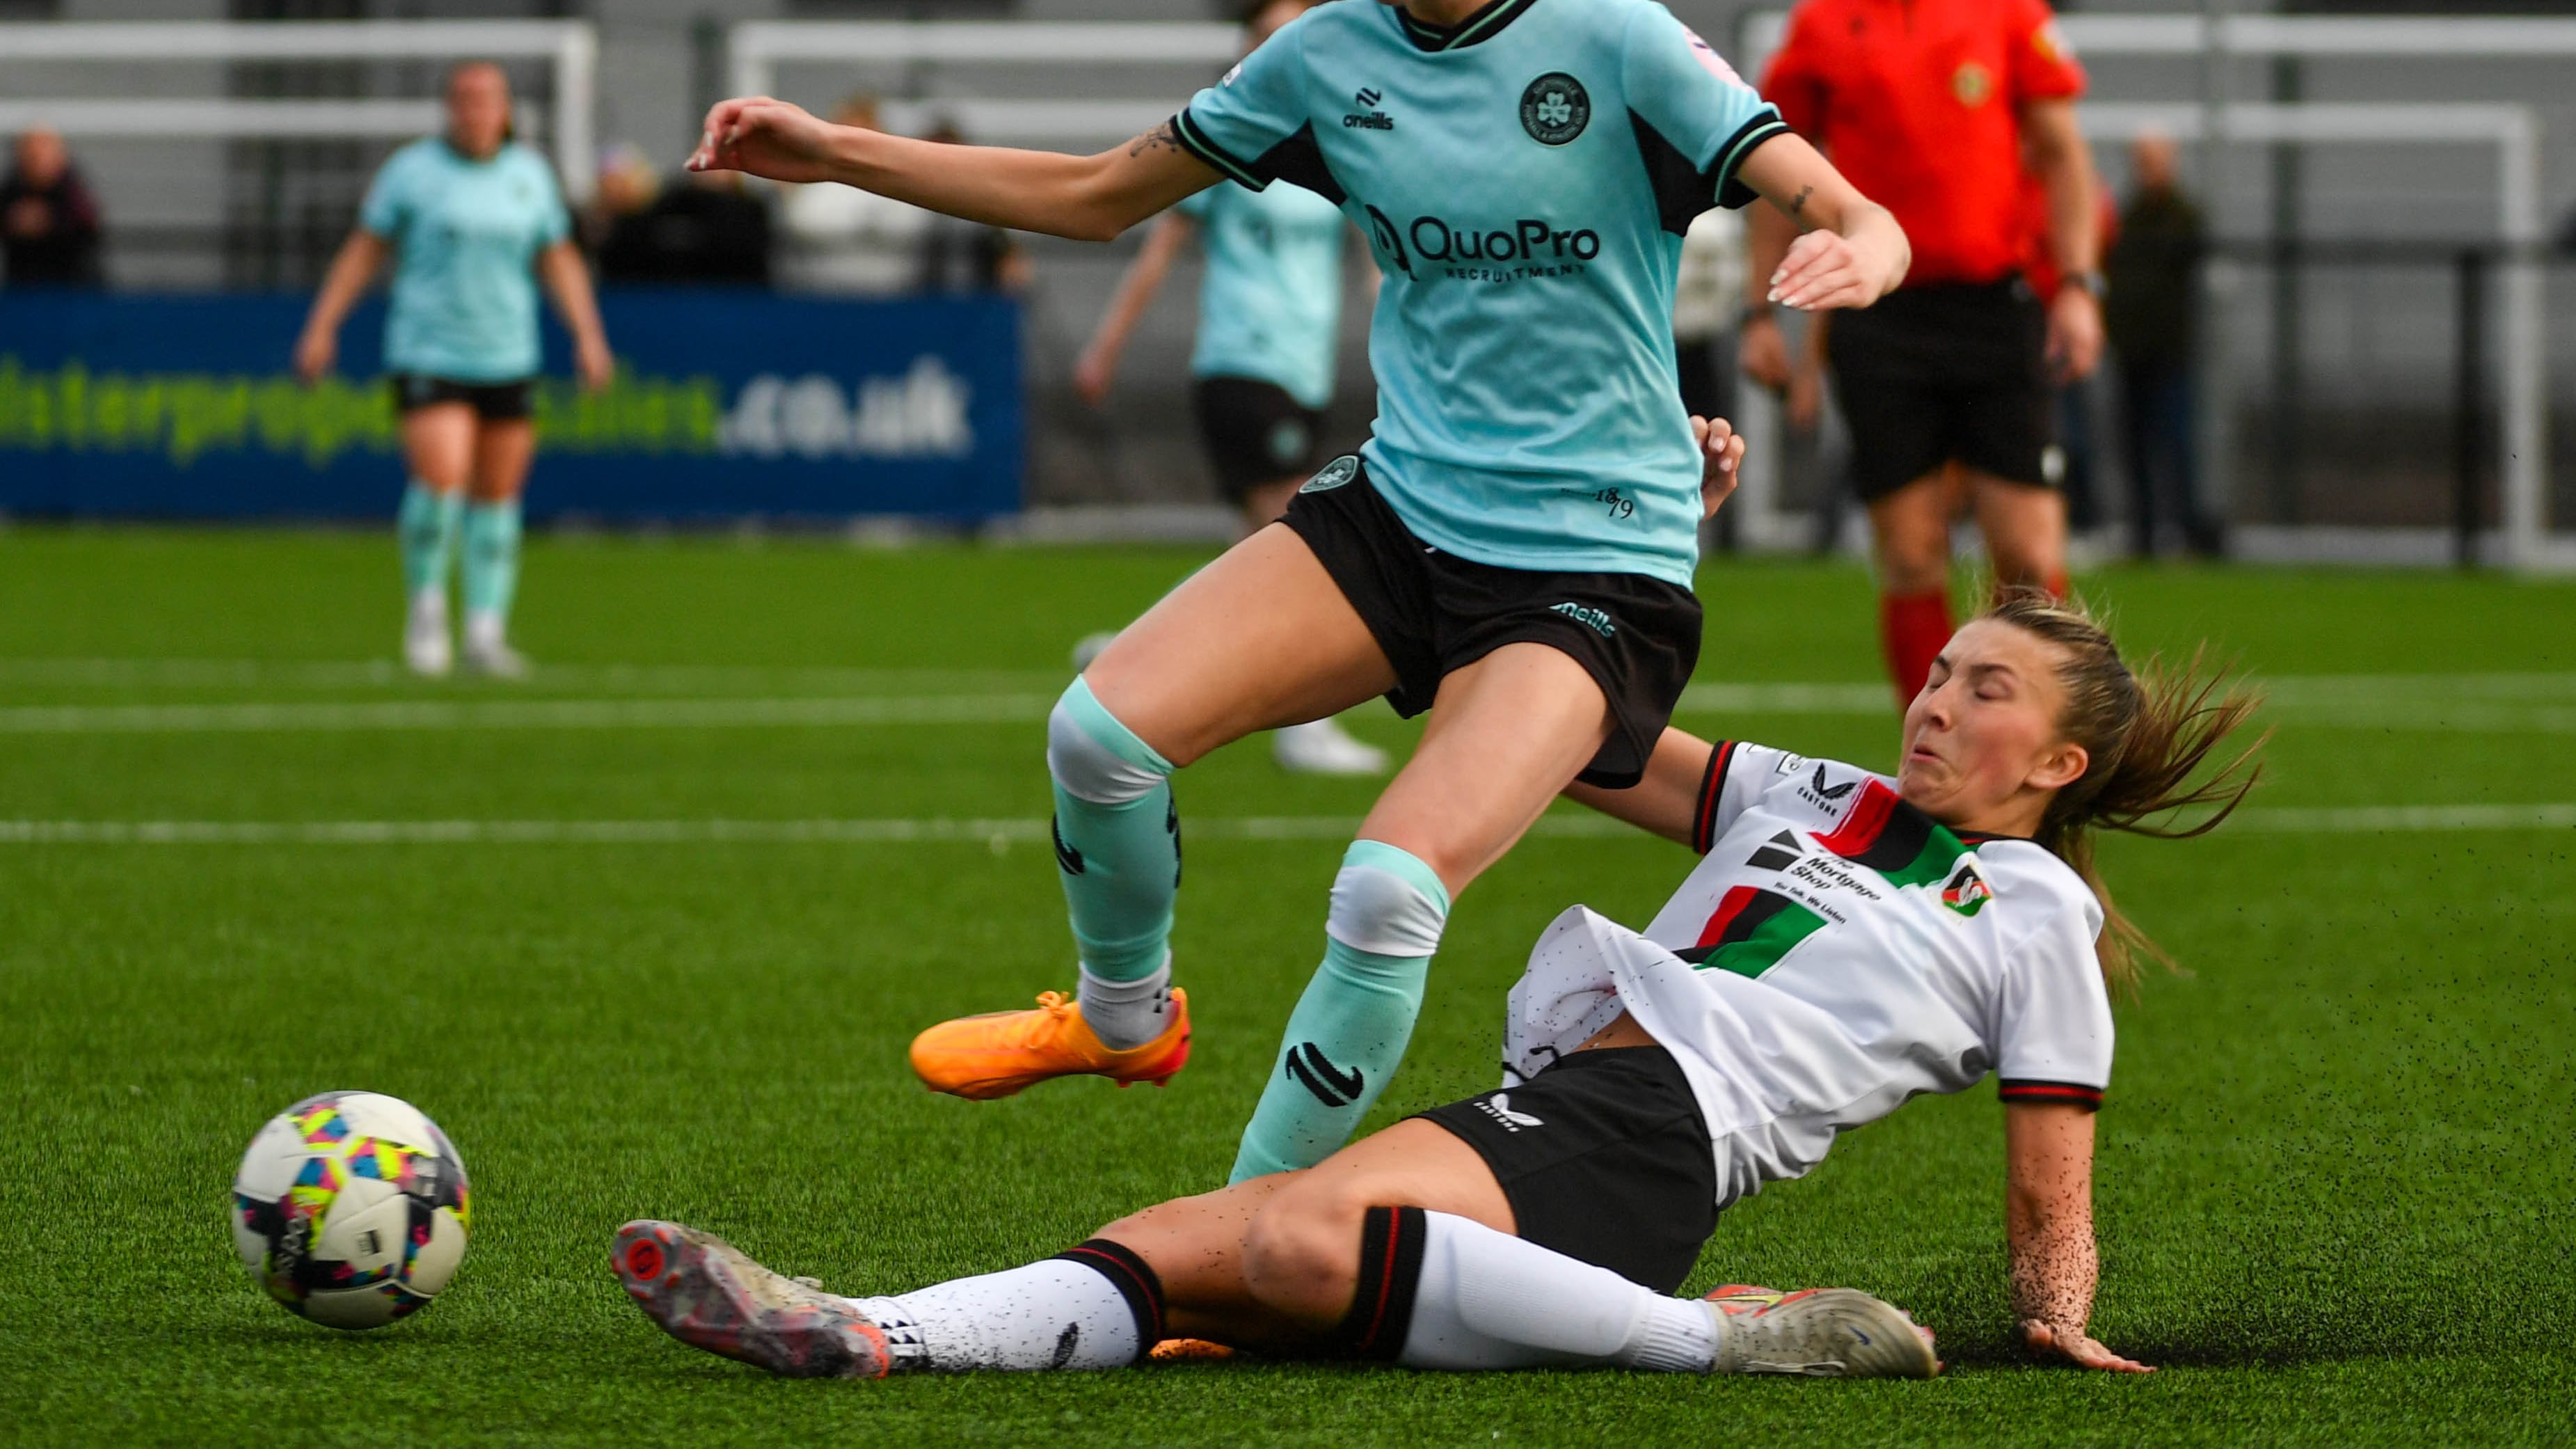 PACEMAKER PRESS BELFAST 04-07-24
Sports Direct Women’s Premiership
Glentoran Women v Cliftonville Ladies
Aimee Neal of Glentoran tackles Caitlin McGuinness of Cliiftonville during this evening’s game at Blanchflower Stadium, Belfast.
Photo - Andrew McCarroll/ Pacemaker Press